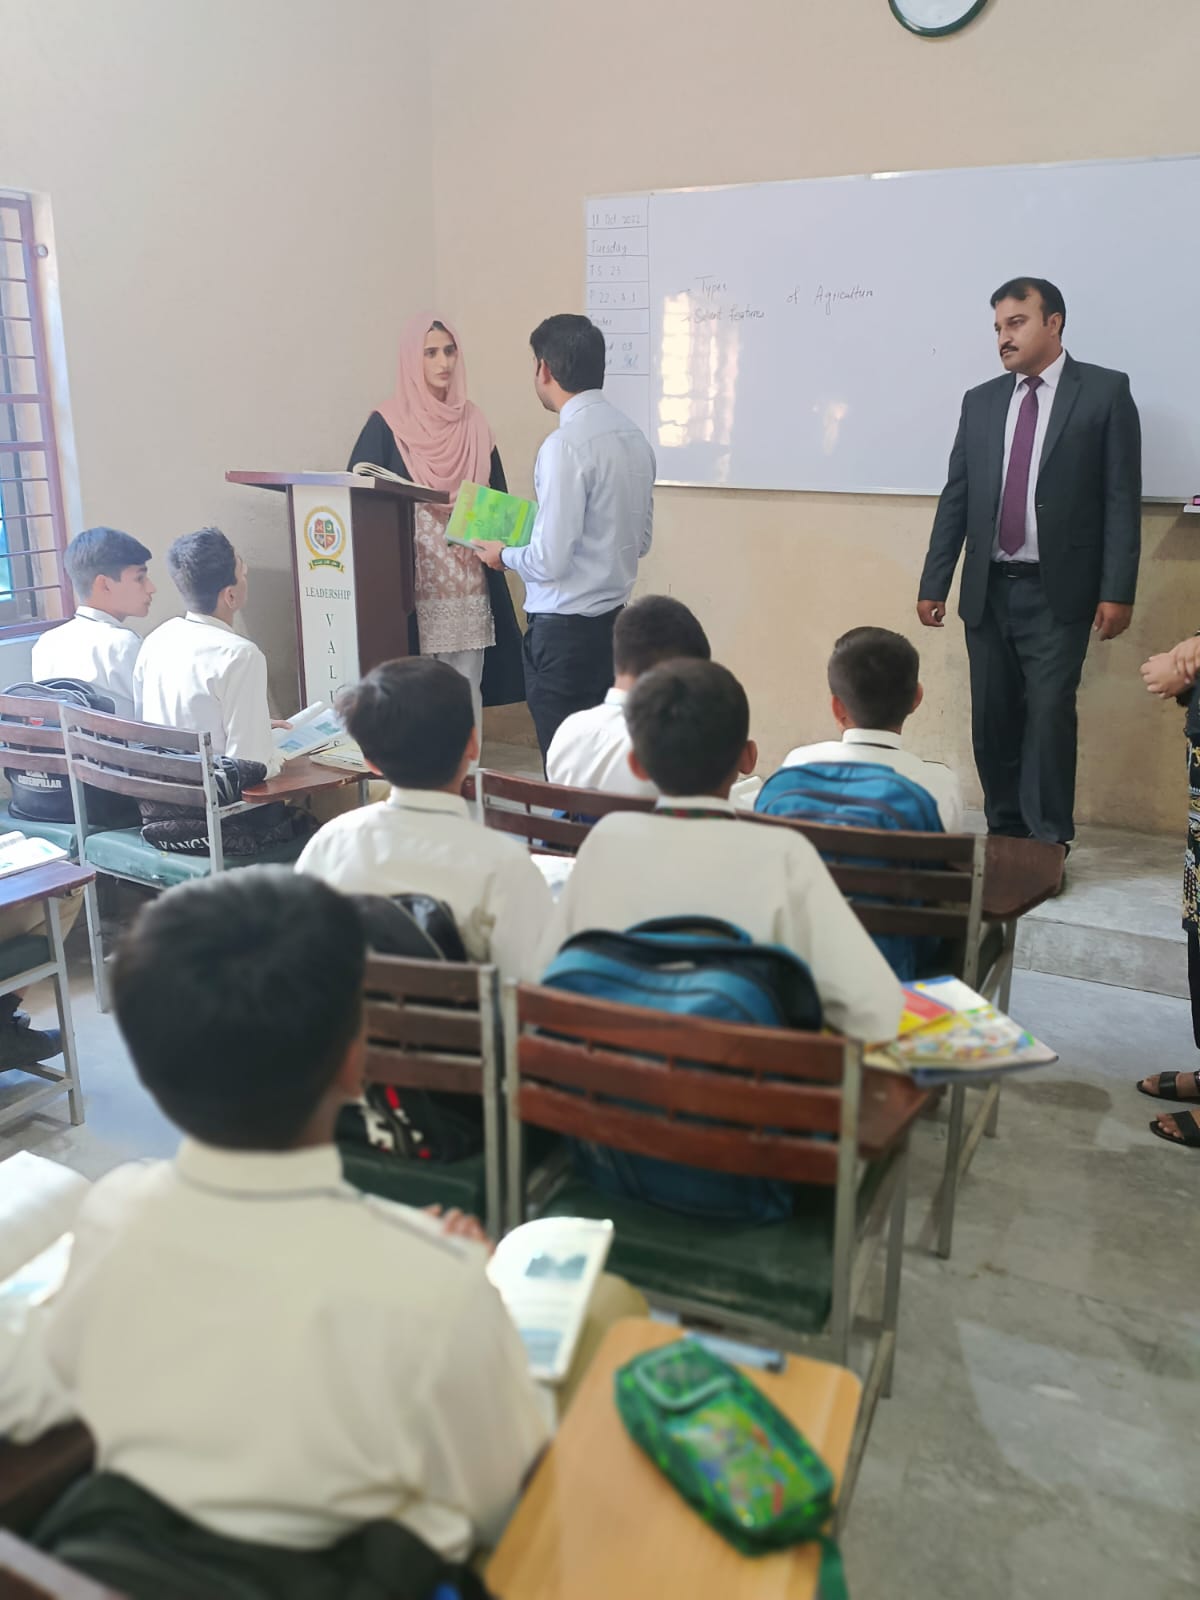 Academics Reforms visit to Forces School and College System Jauharabad Campus